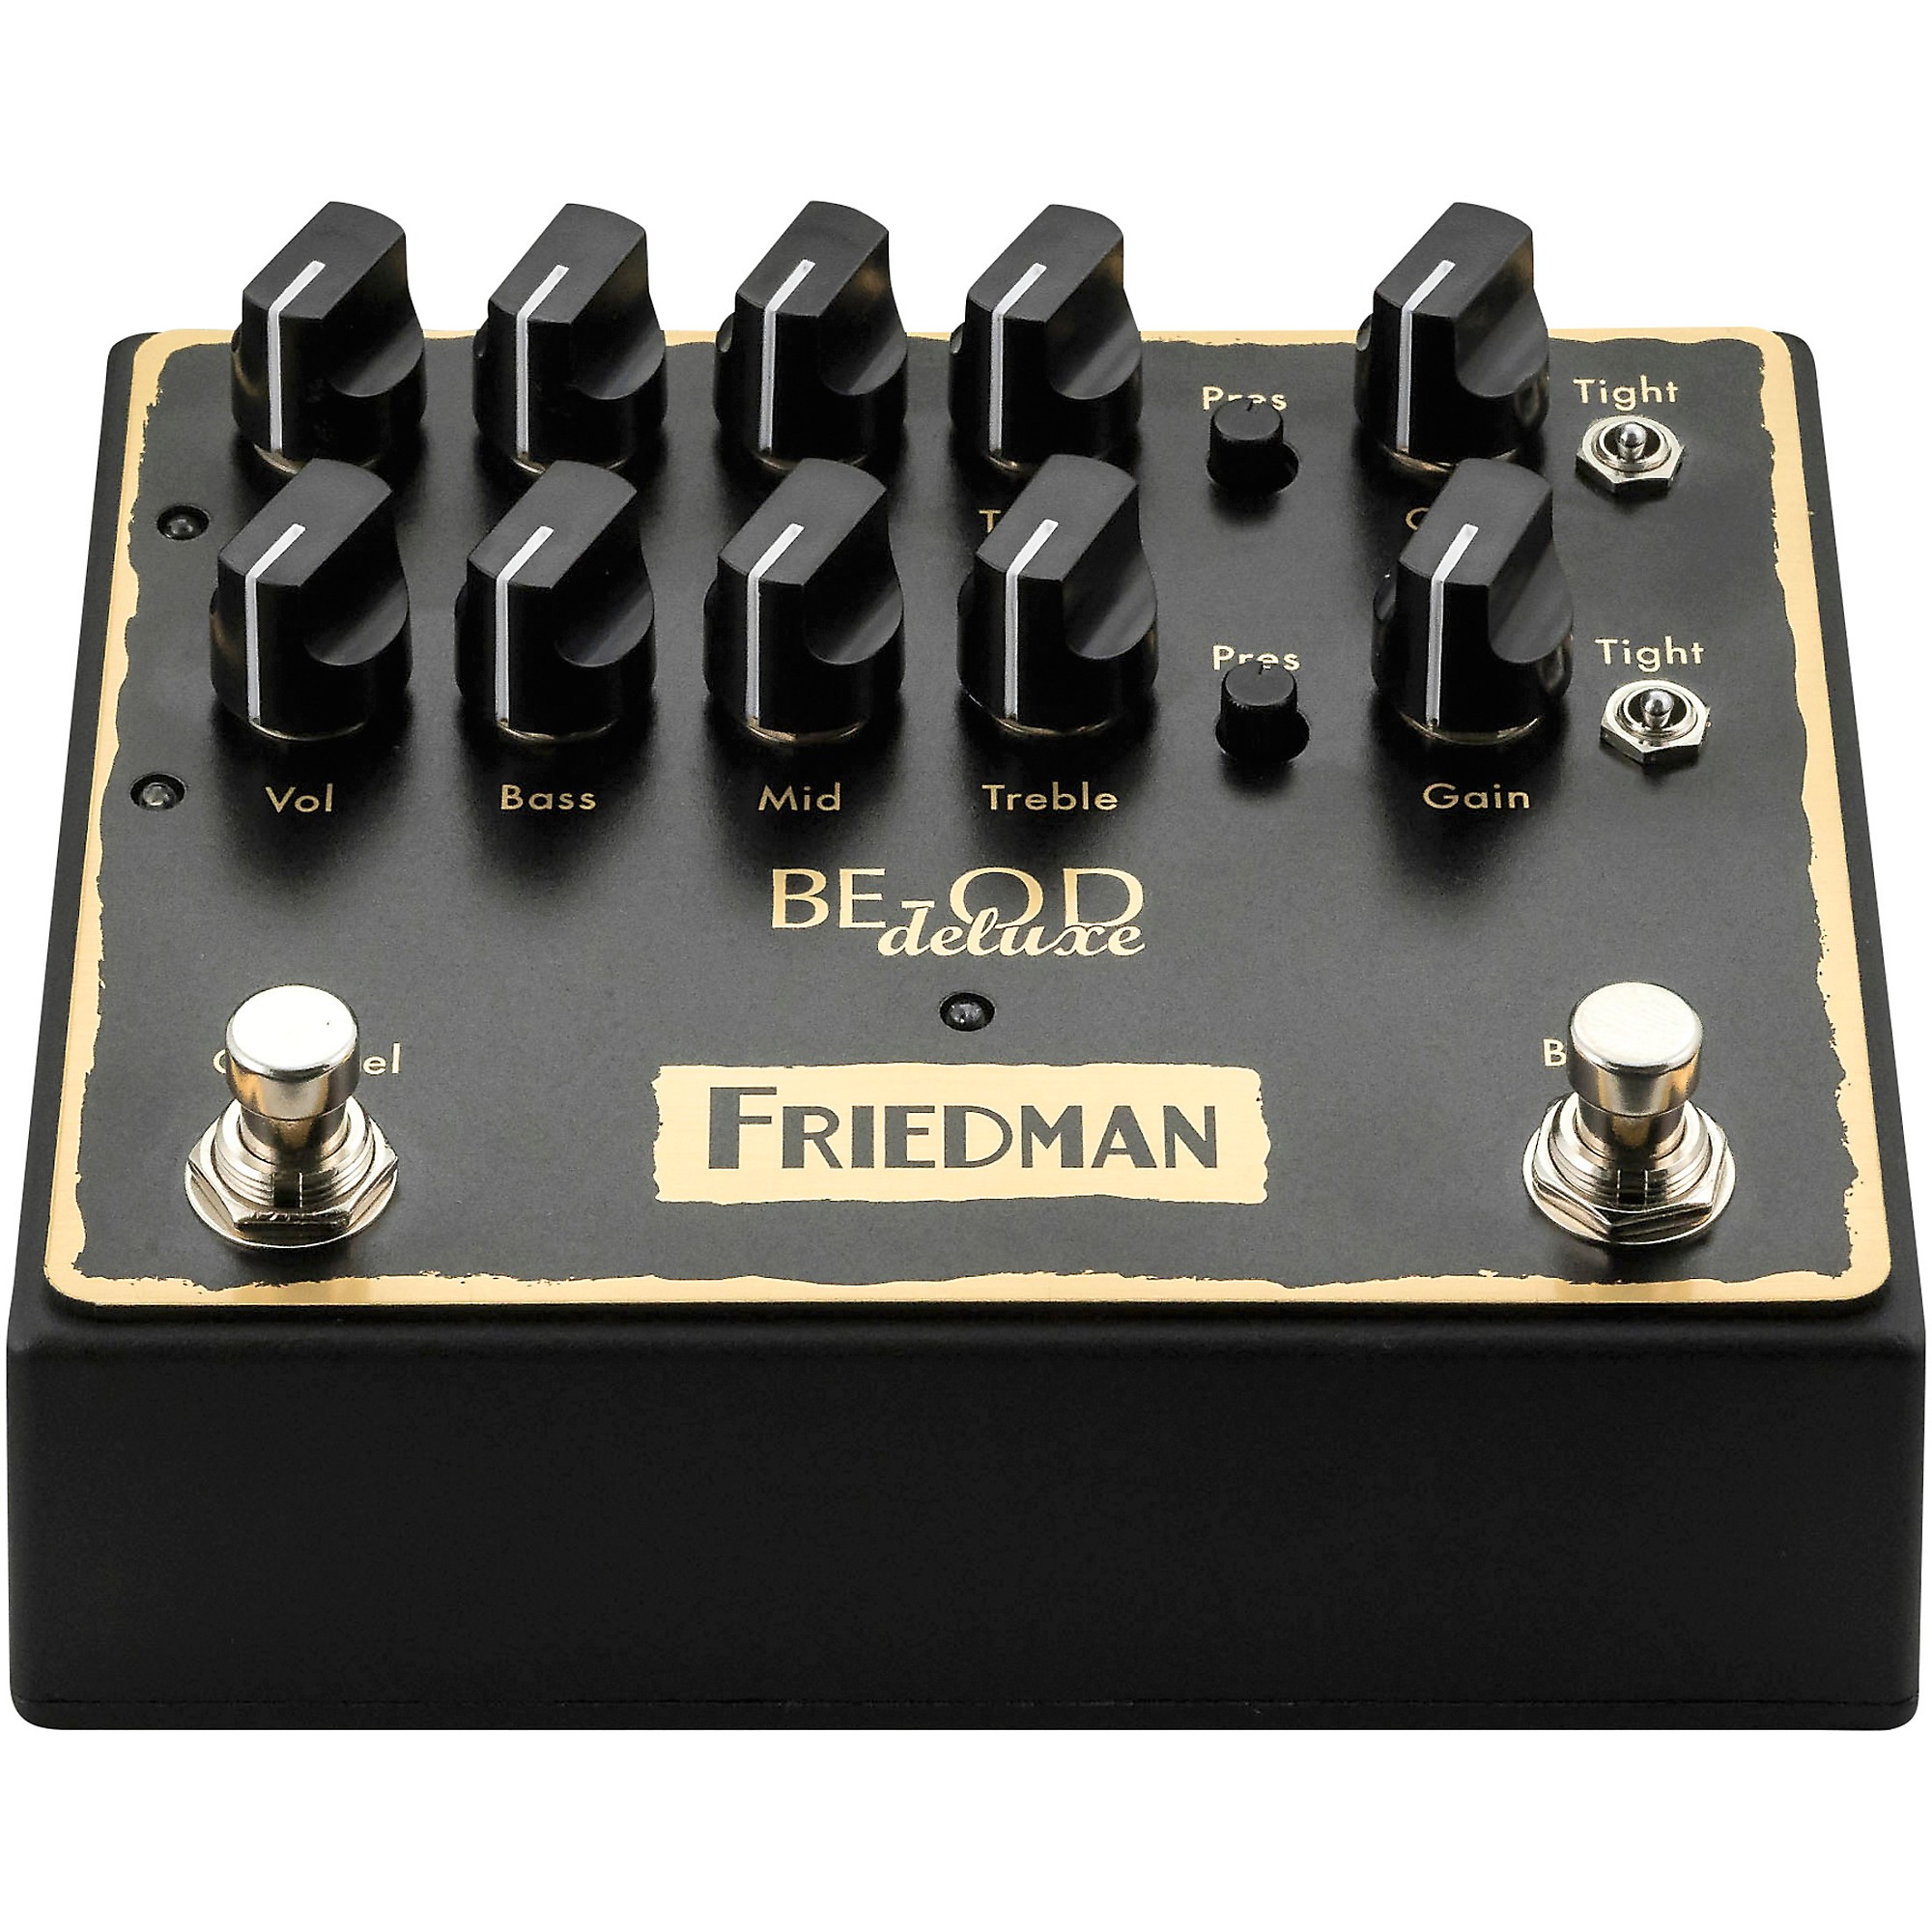 Friedman BE OD Deluxe Dual Brown Eye Overdrive Effects Pedal